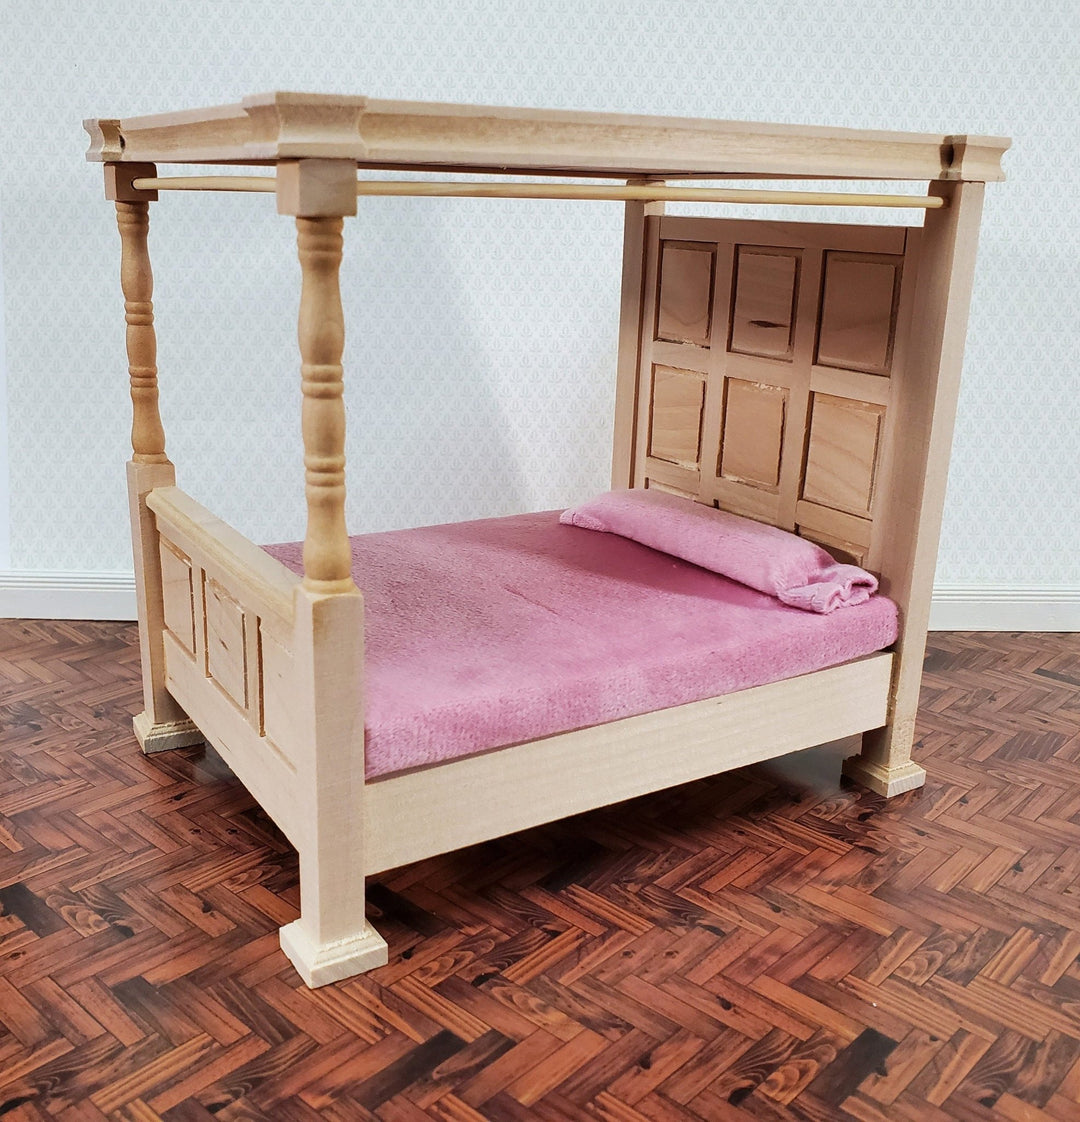 Dollhouse Bed 4 Poster Canopy Tudor Style Unpainted Wood 1:12 Scale Miniature Bedroom Furniture - Miniature Crush